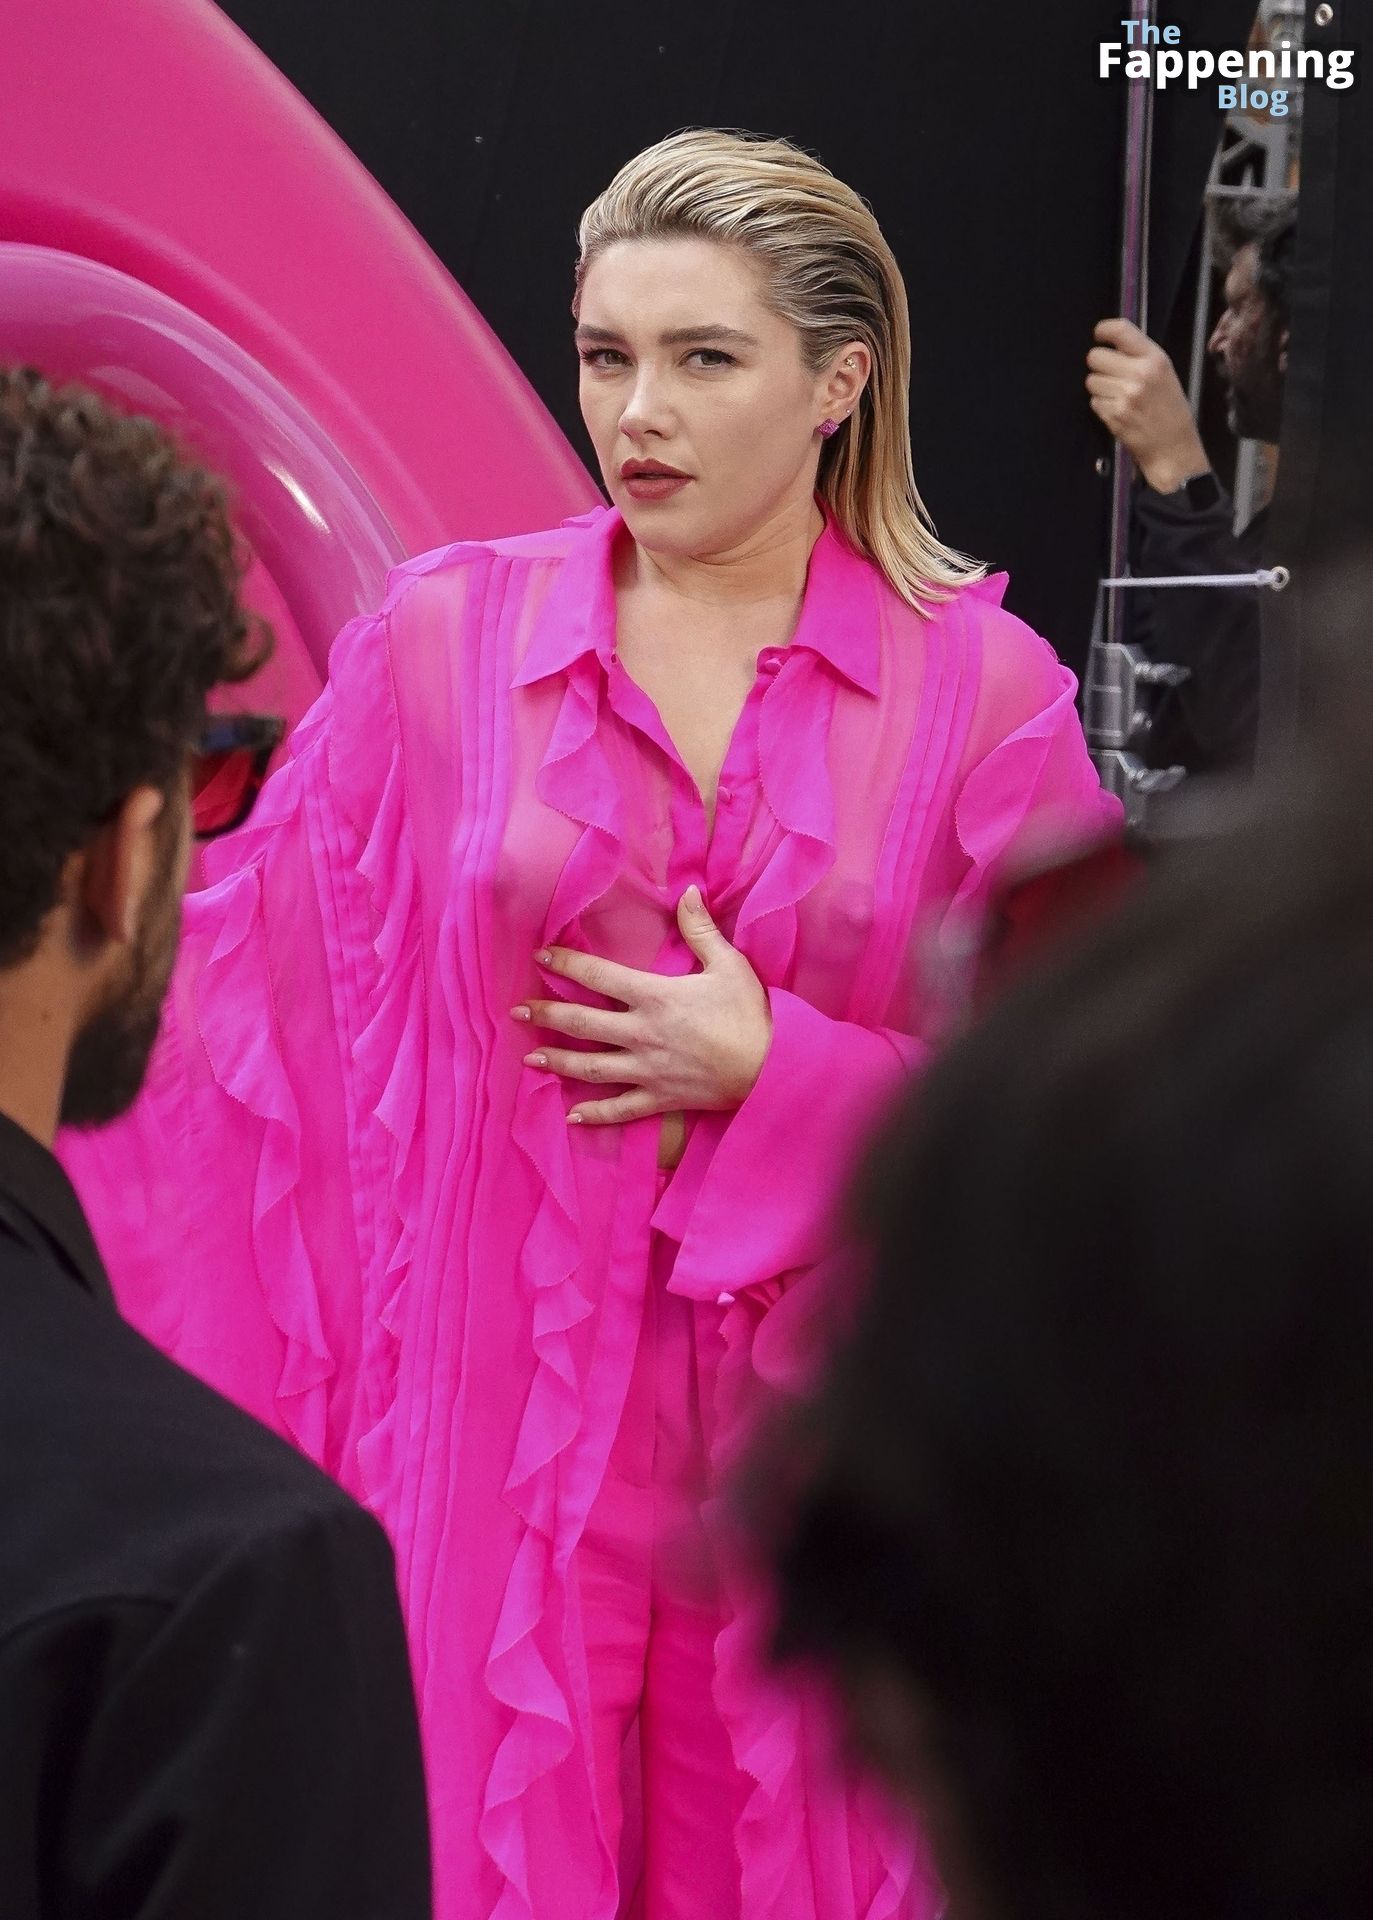 Florence-Pugh-Nude-Tits-The-Fappening-Blog-82.jpg